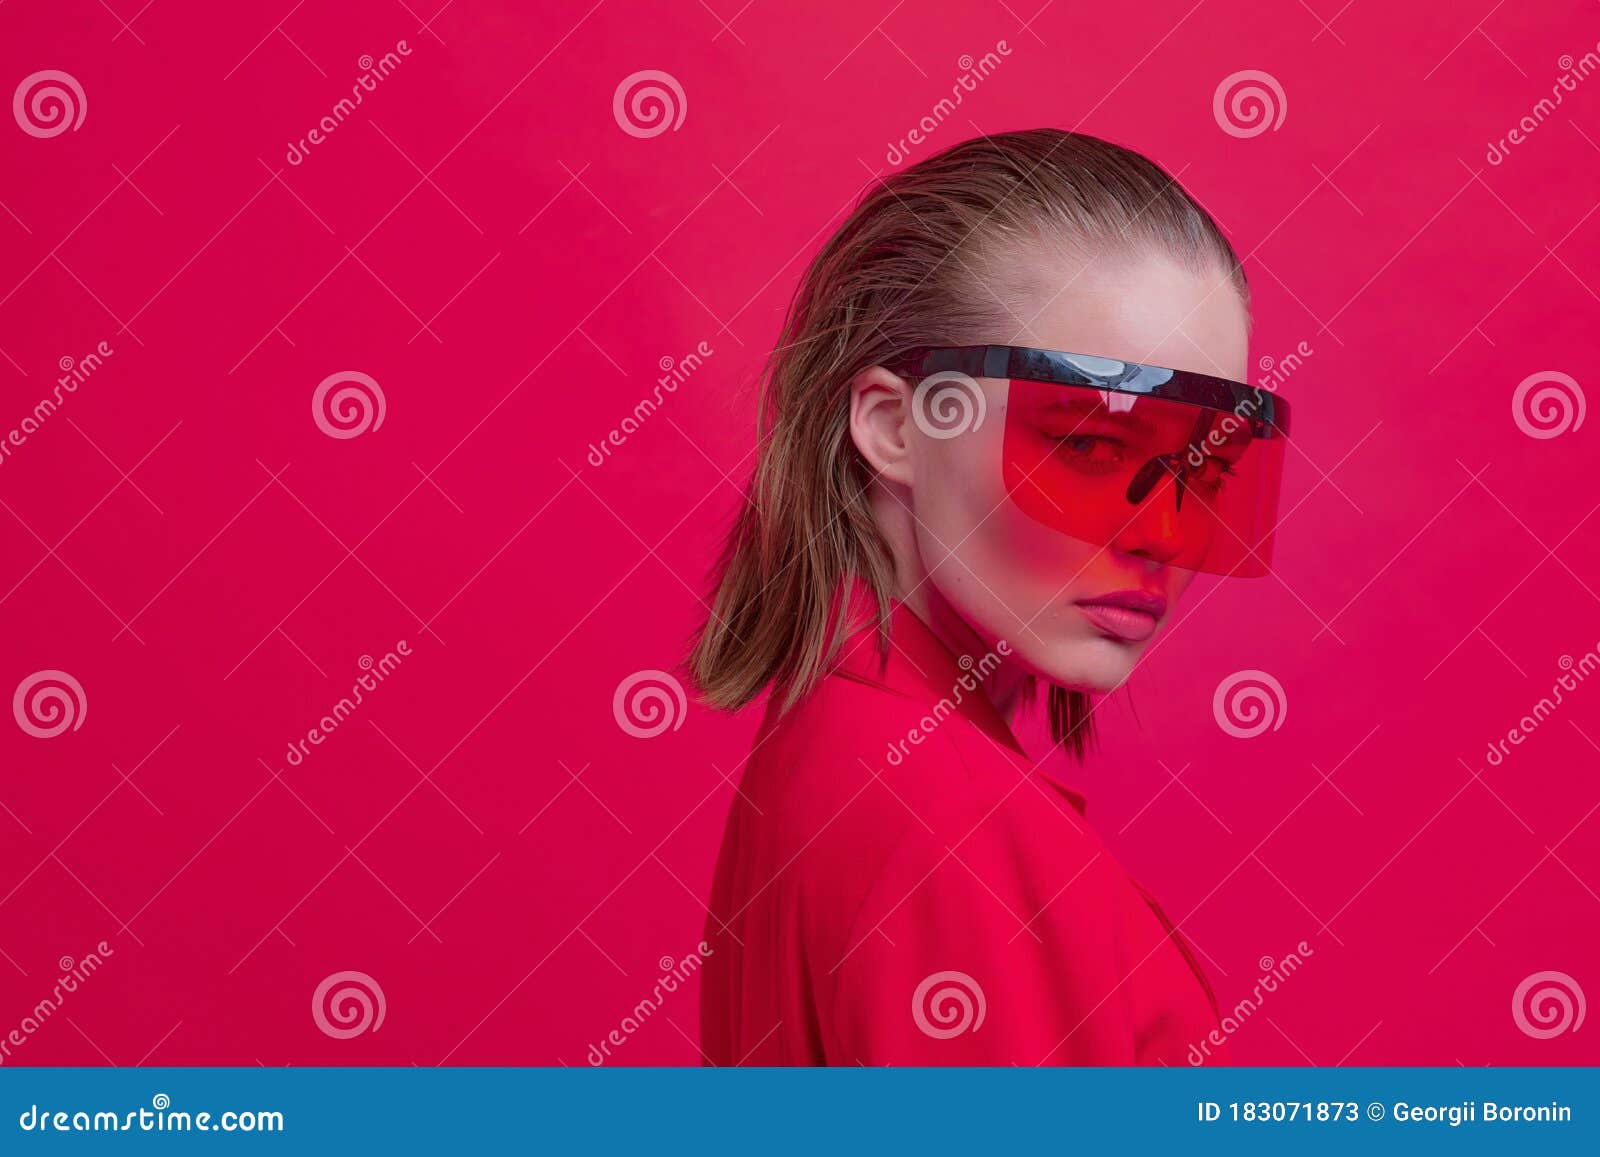 A Cool Stylish Girl with a Fashionable Hairstyle and Stylish Glasses with a  Large Glass Poses on a Bright Red Background Stock Image - Image of  colorful, girl: 183071873